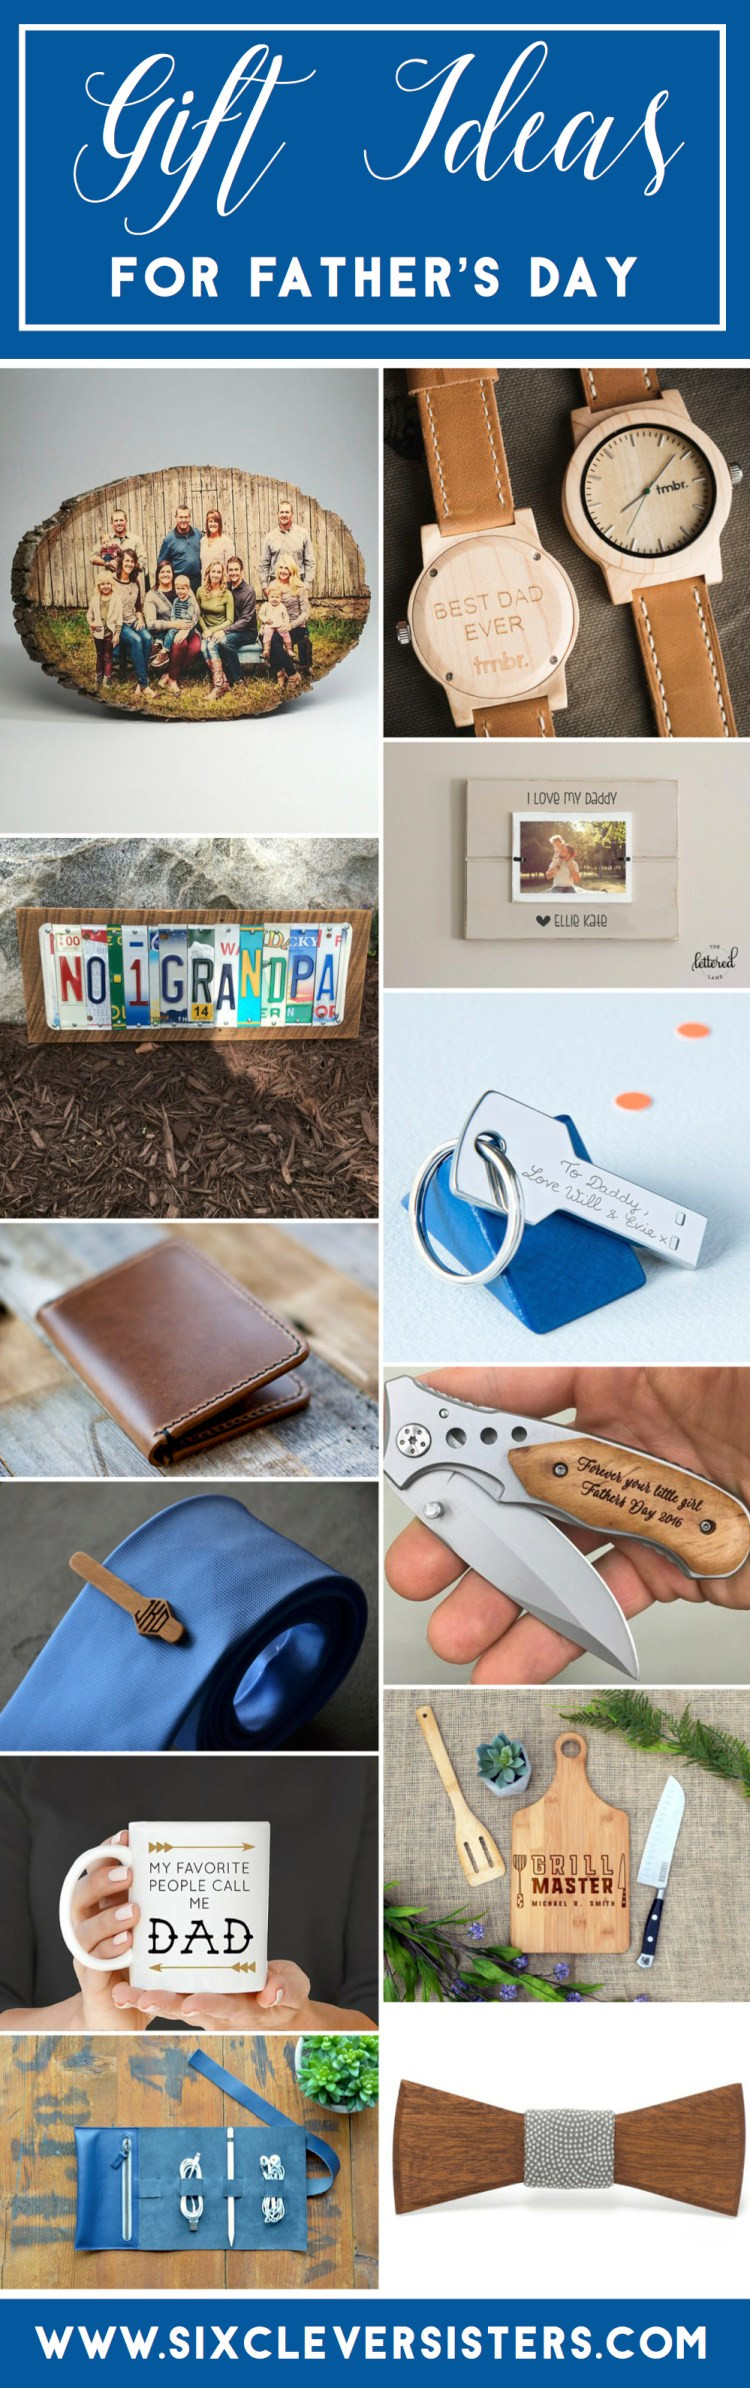 Unique Father Day Gift Ideas
 25 Great Father s Day Gift Ideas on Etsy that are amazing